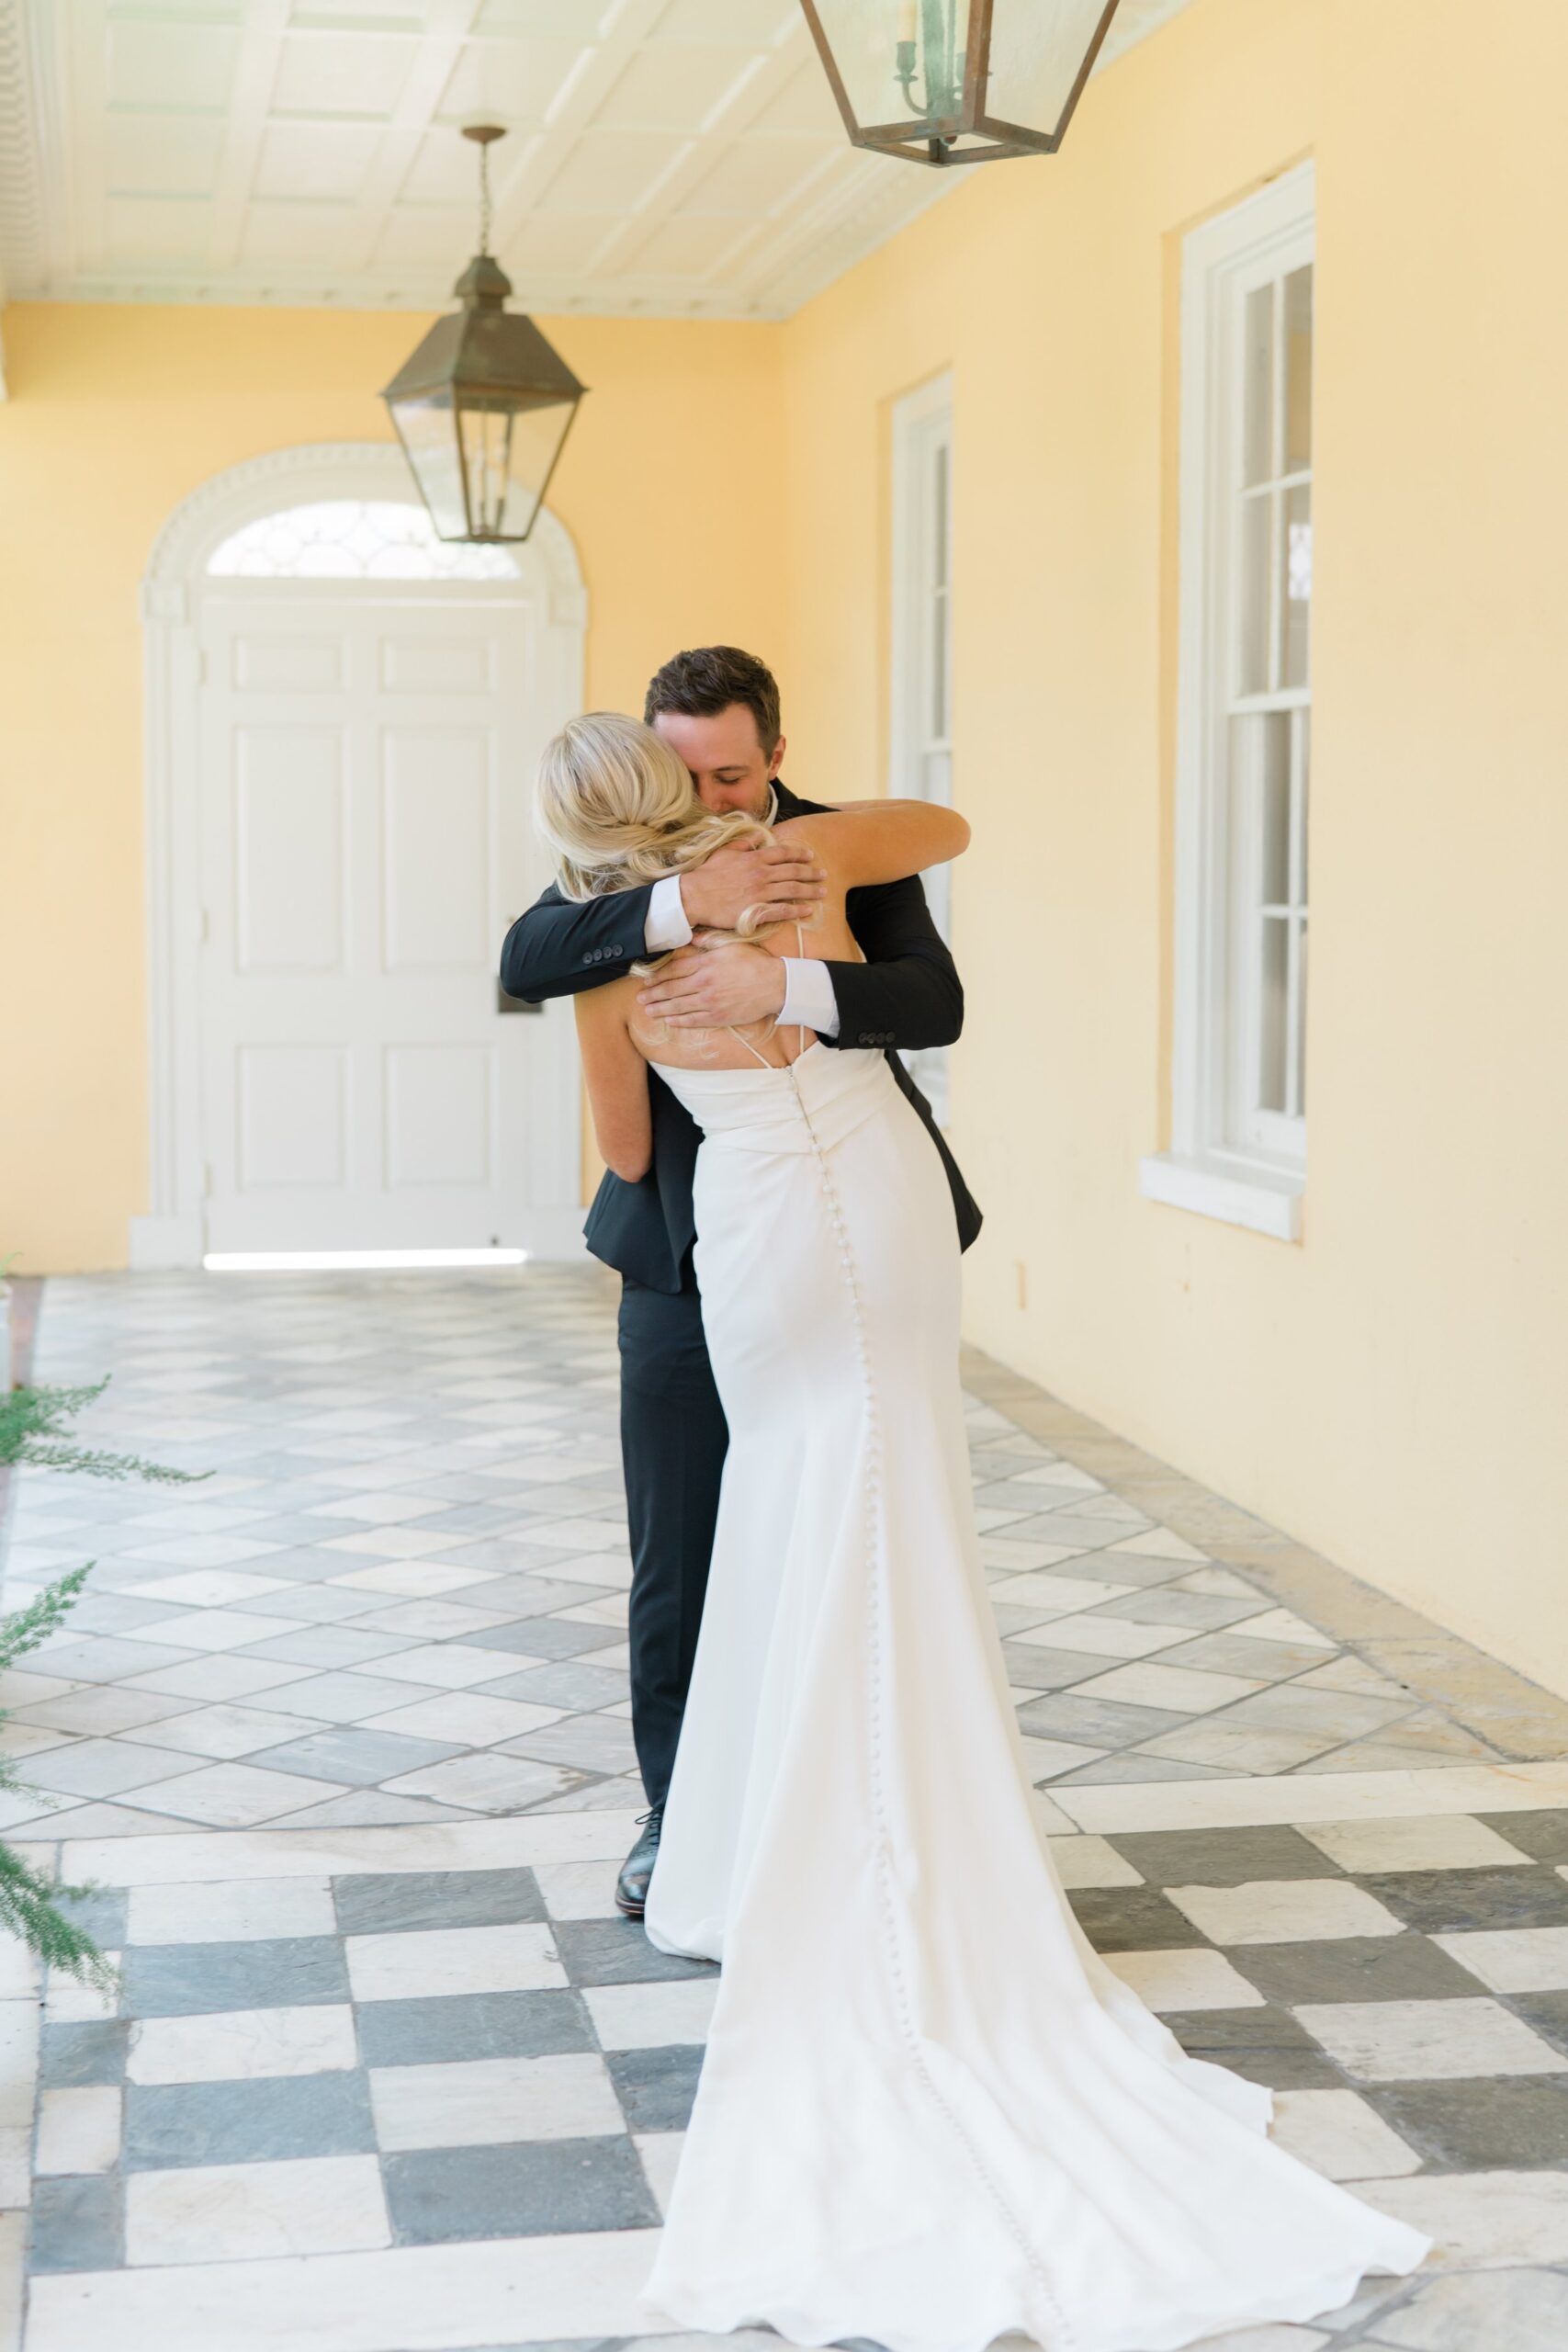 bride and groom share a hug after seeing each other for the first time on wedding day.